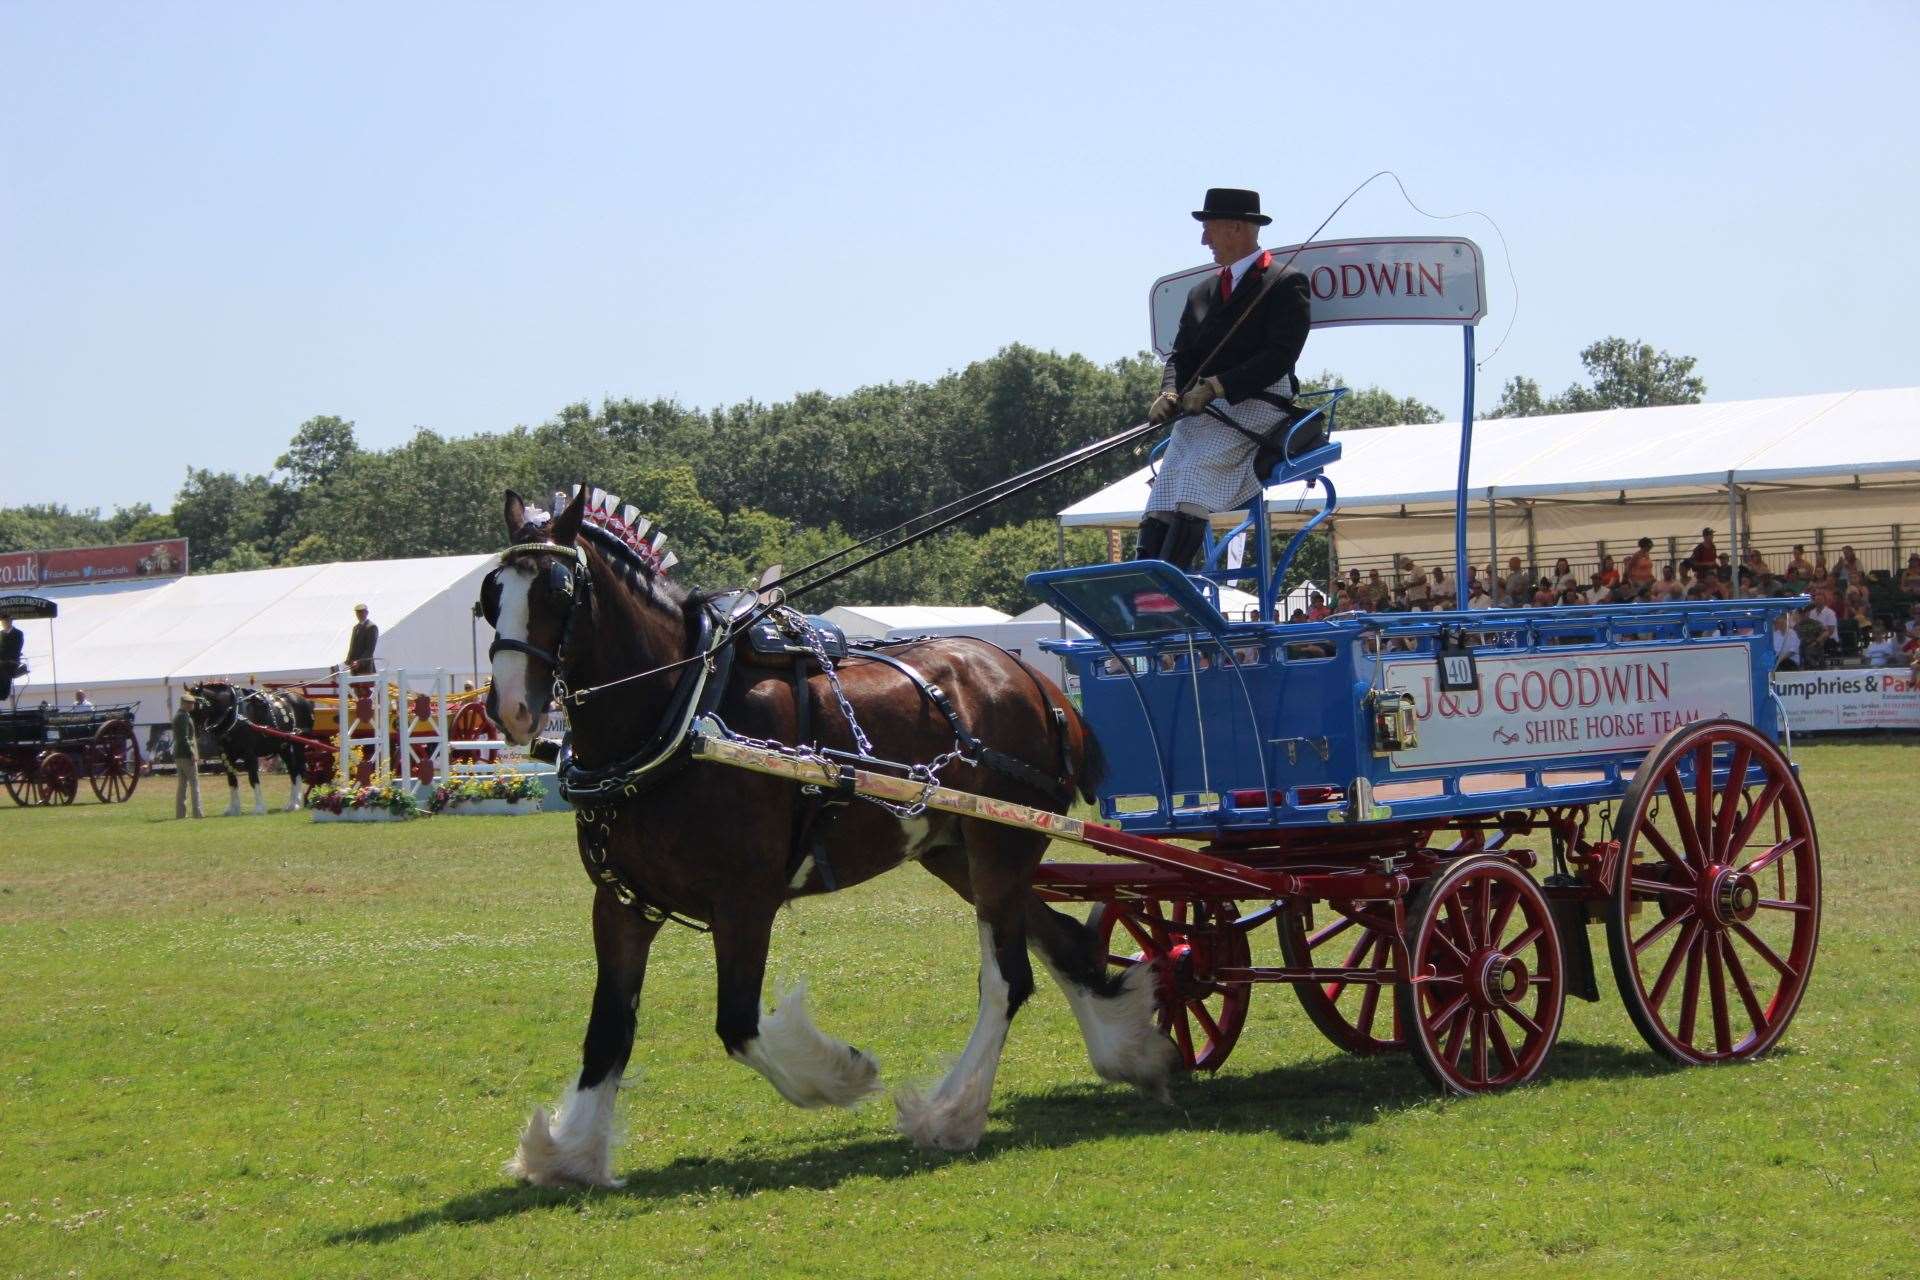 John Goodwin of Sheppey with his shire horse at the Kent County Show. File photo (13547200)